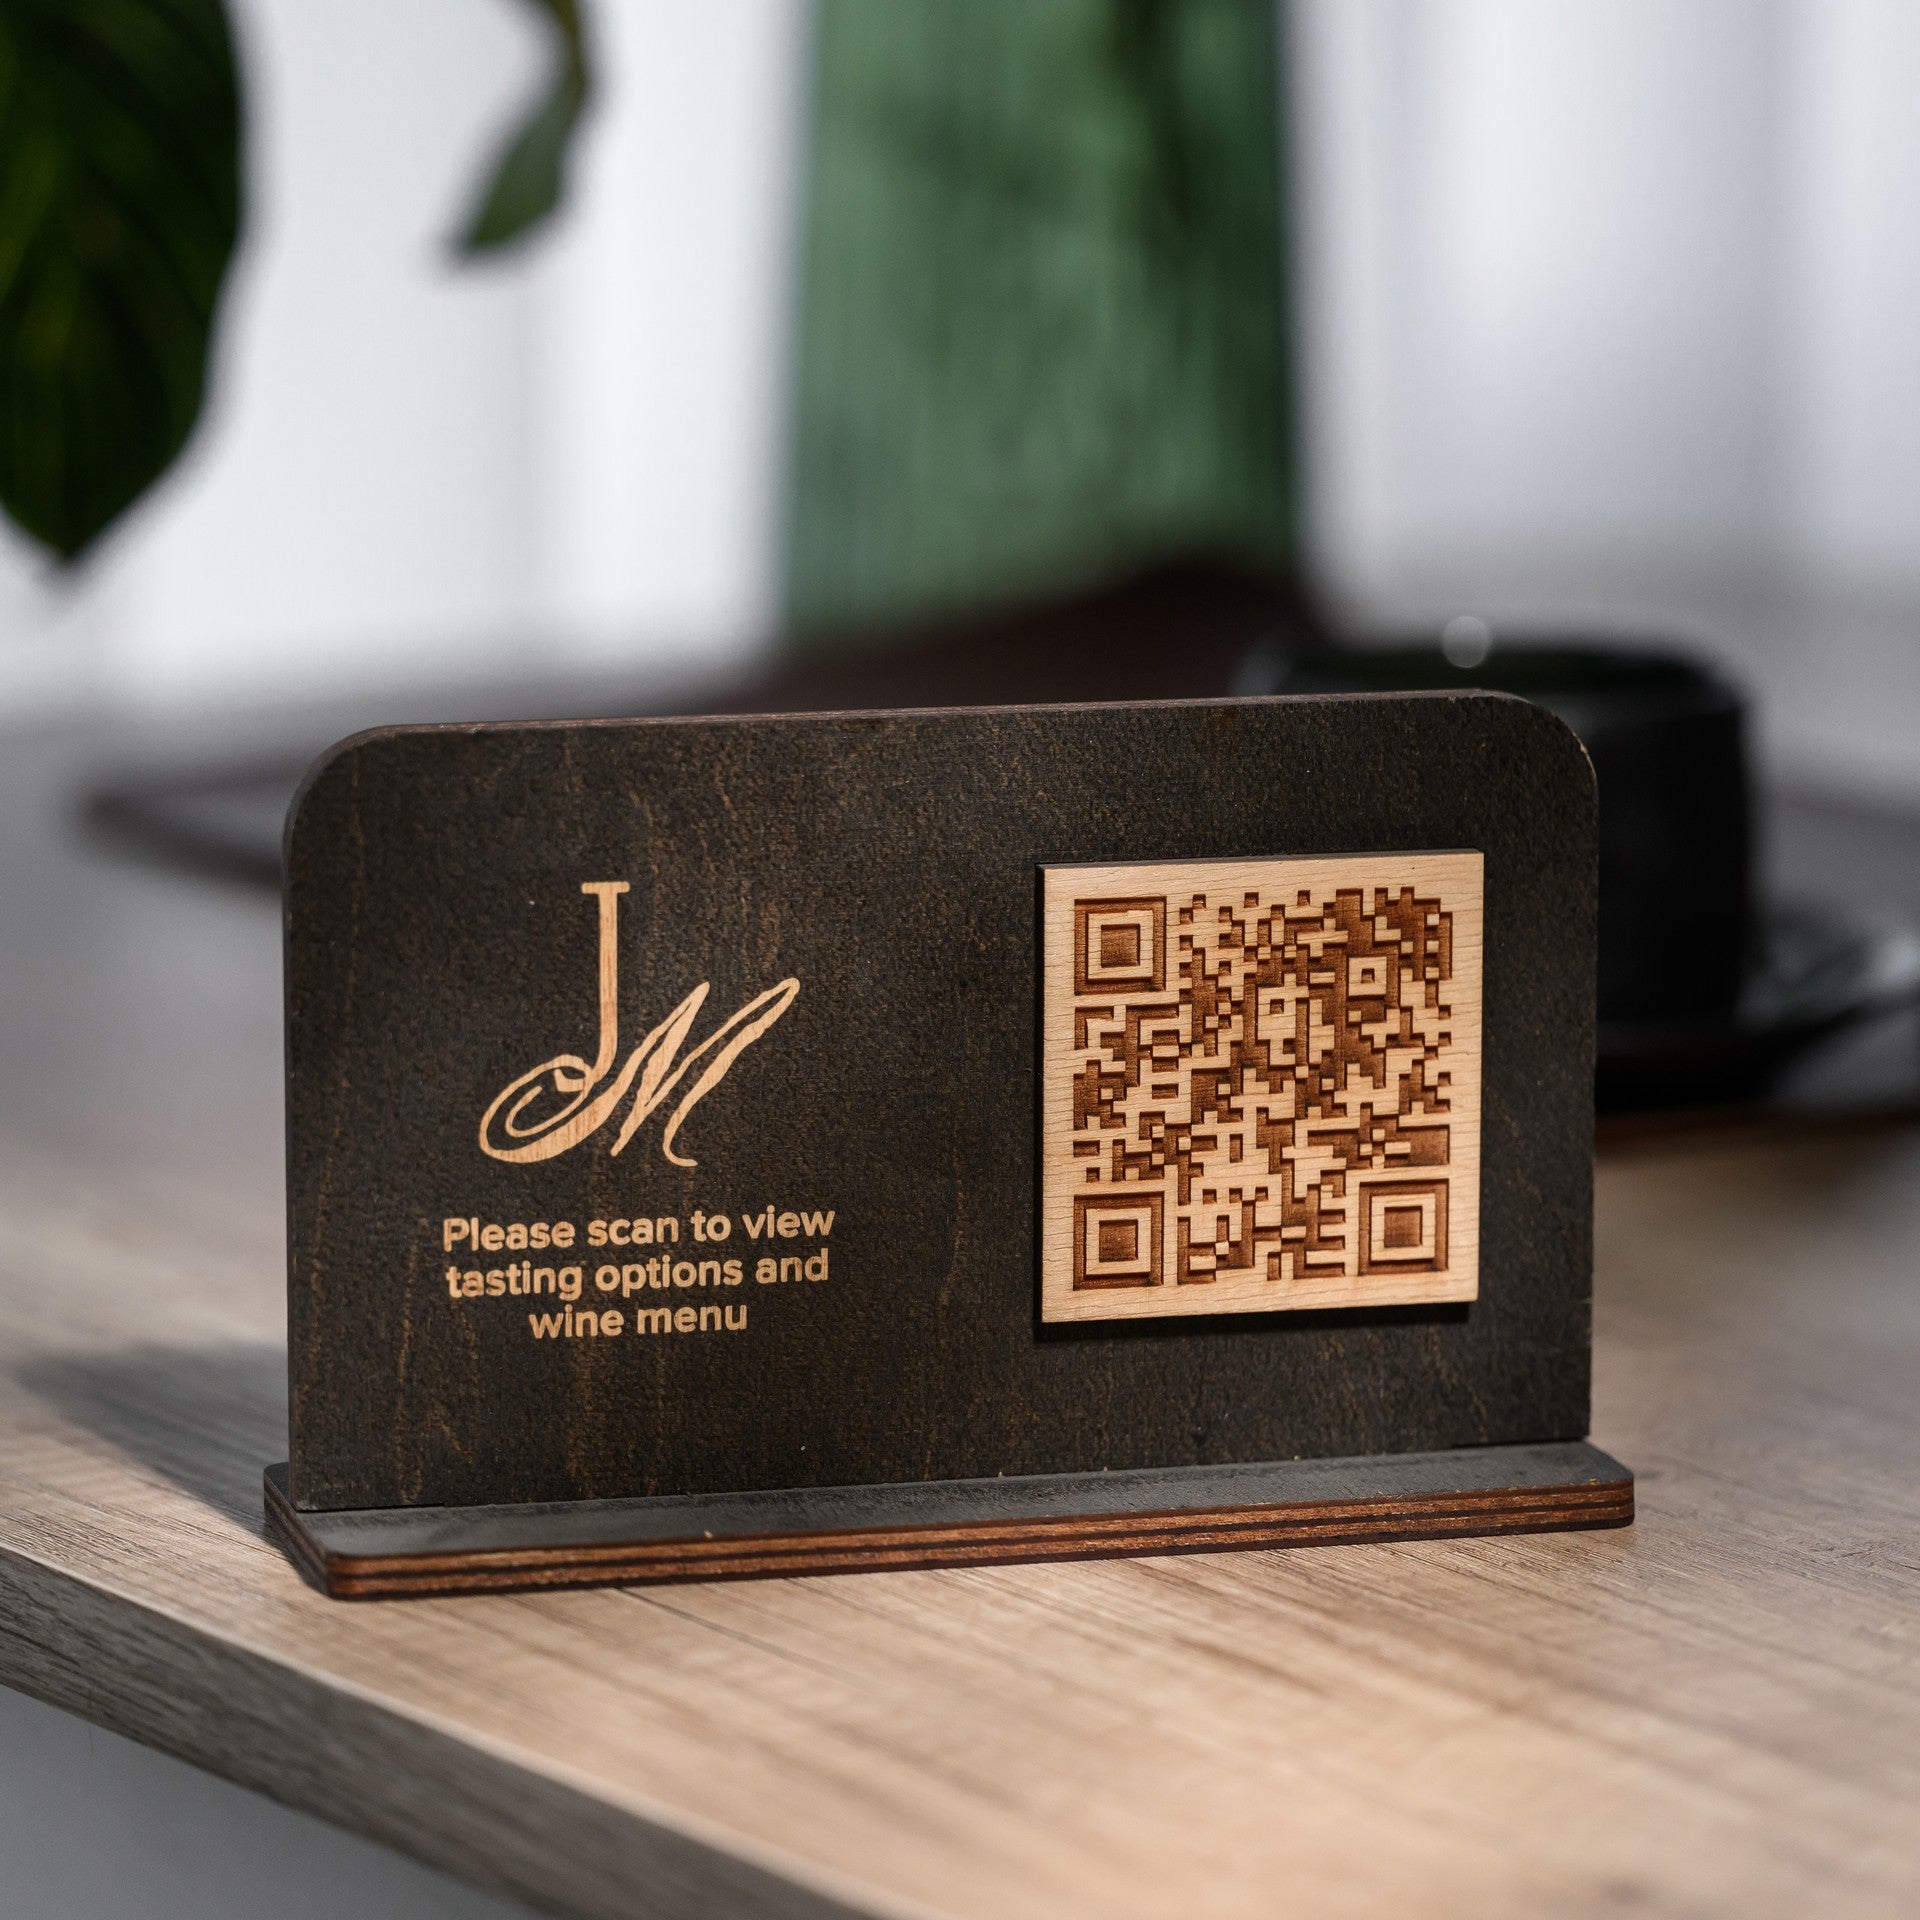 Menu QR Sign Stand for quick and easy menu access. Ideal for desktops in cafes and bars, offering a touchless menu experience.